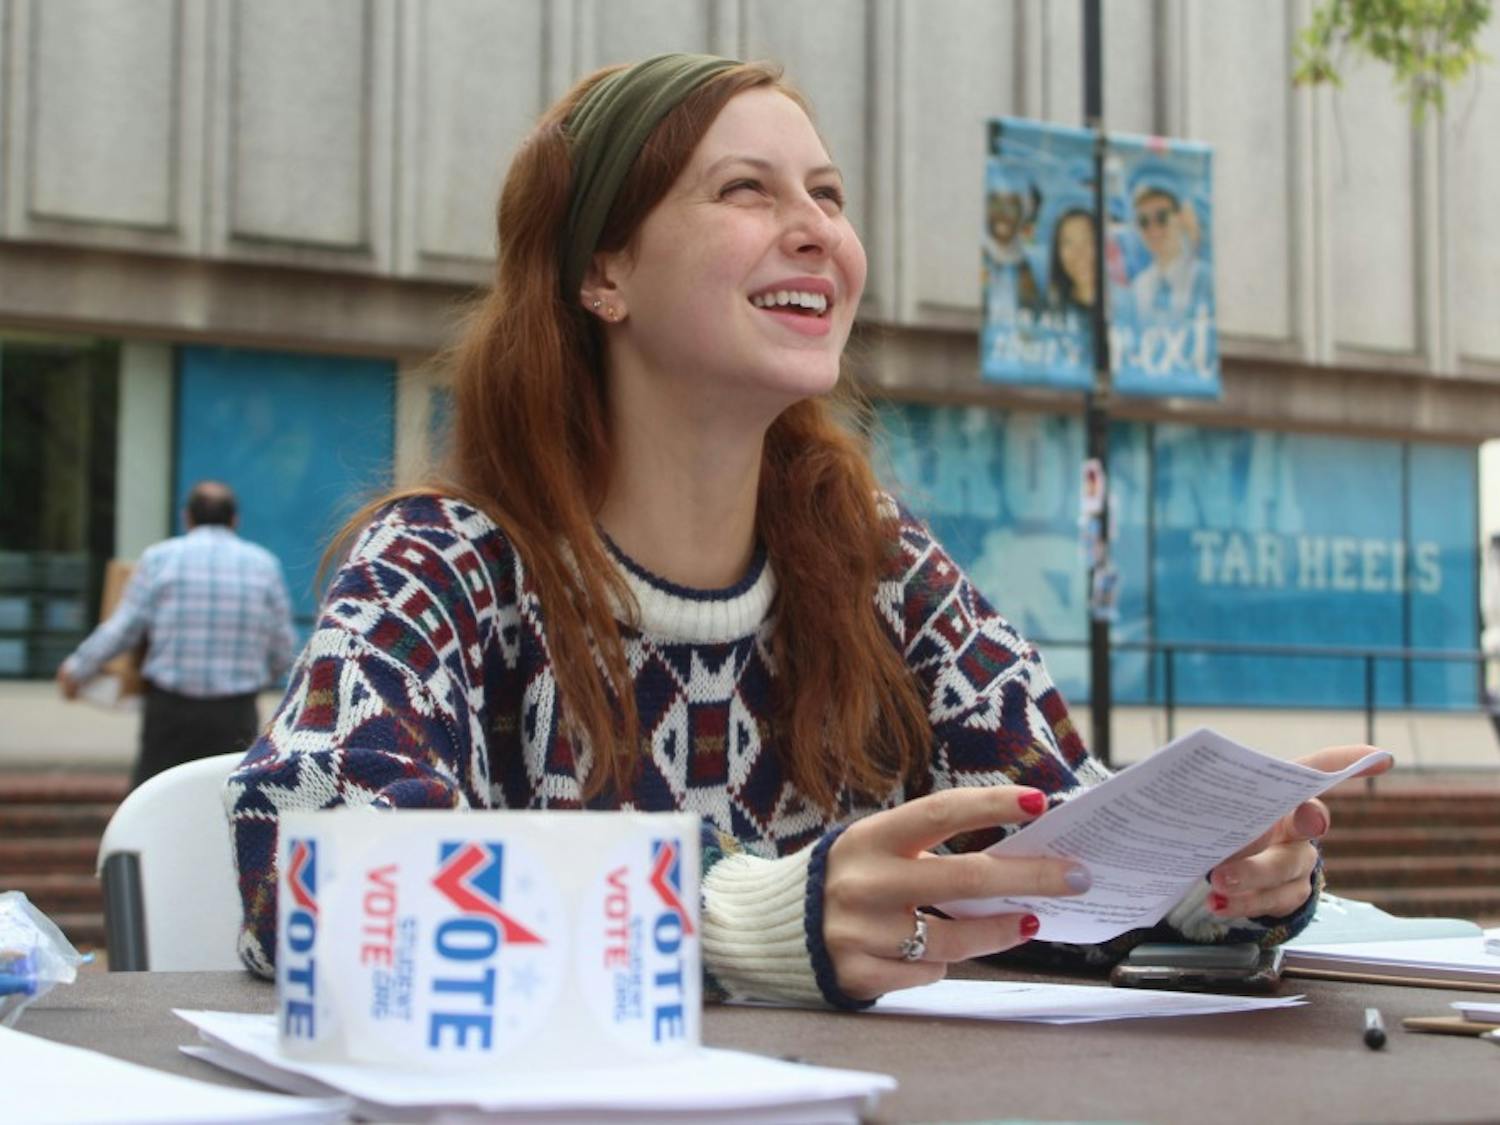 First-year Cassie Teixeira, exercise and sports science major, helping students at the voter registration drive on Wednesday, Oct. 9, 2019. Teixeira works for March For Our Lives UNC-CH. "Everyone has the right to vote and it's very important to use that right," Teixeria said.